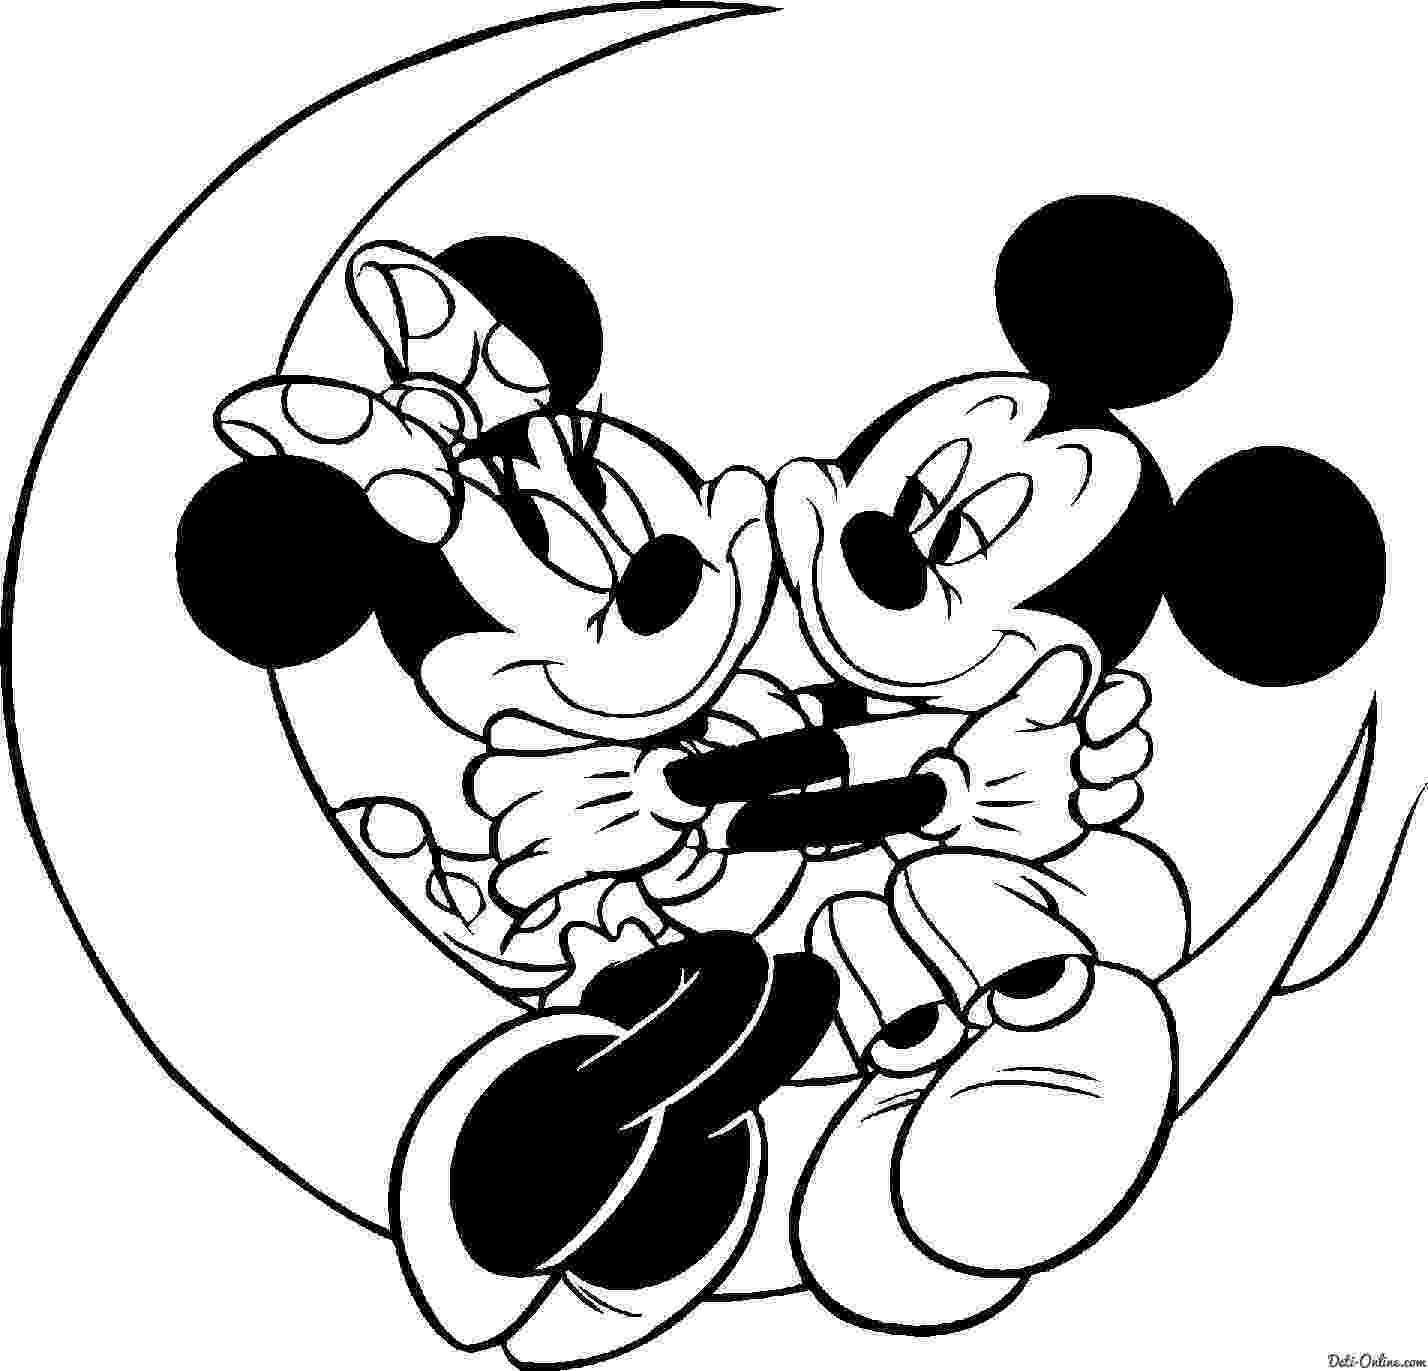 black and white pictures of mickey mouse mickey mouse black and white clipart panda free of and pictures black mouse white mickey 